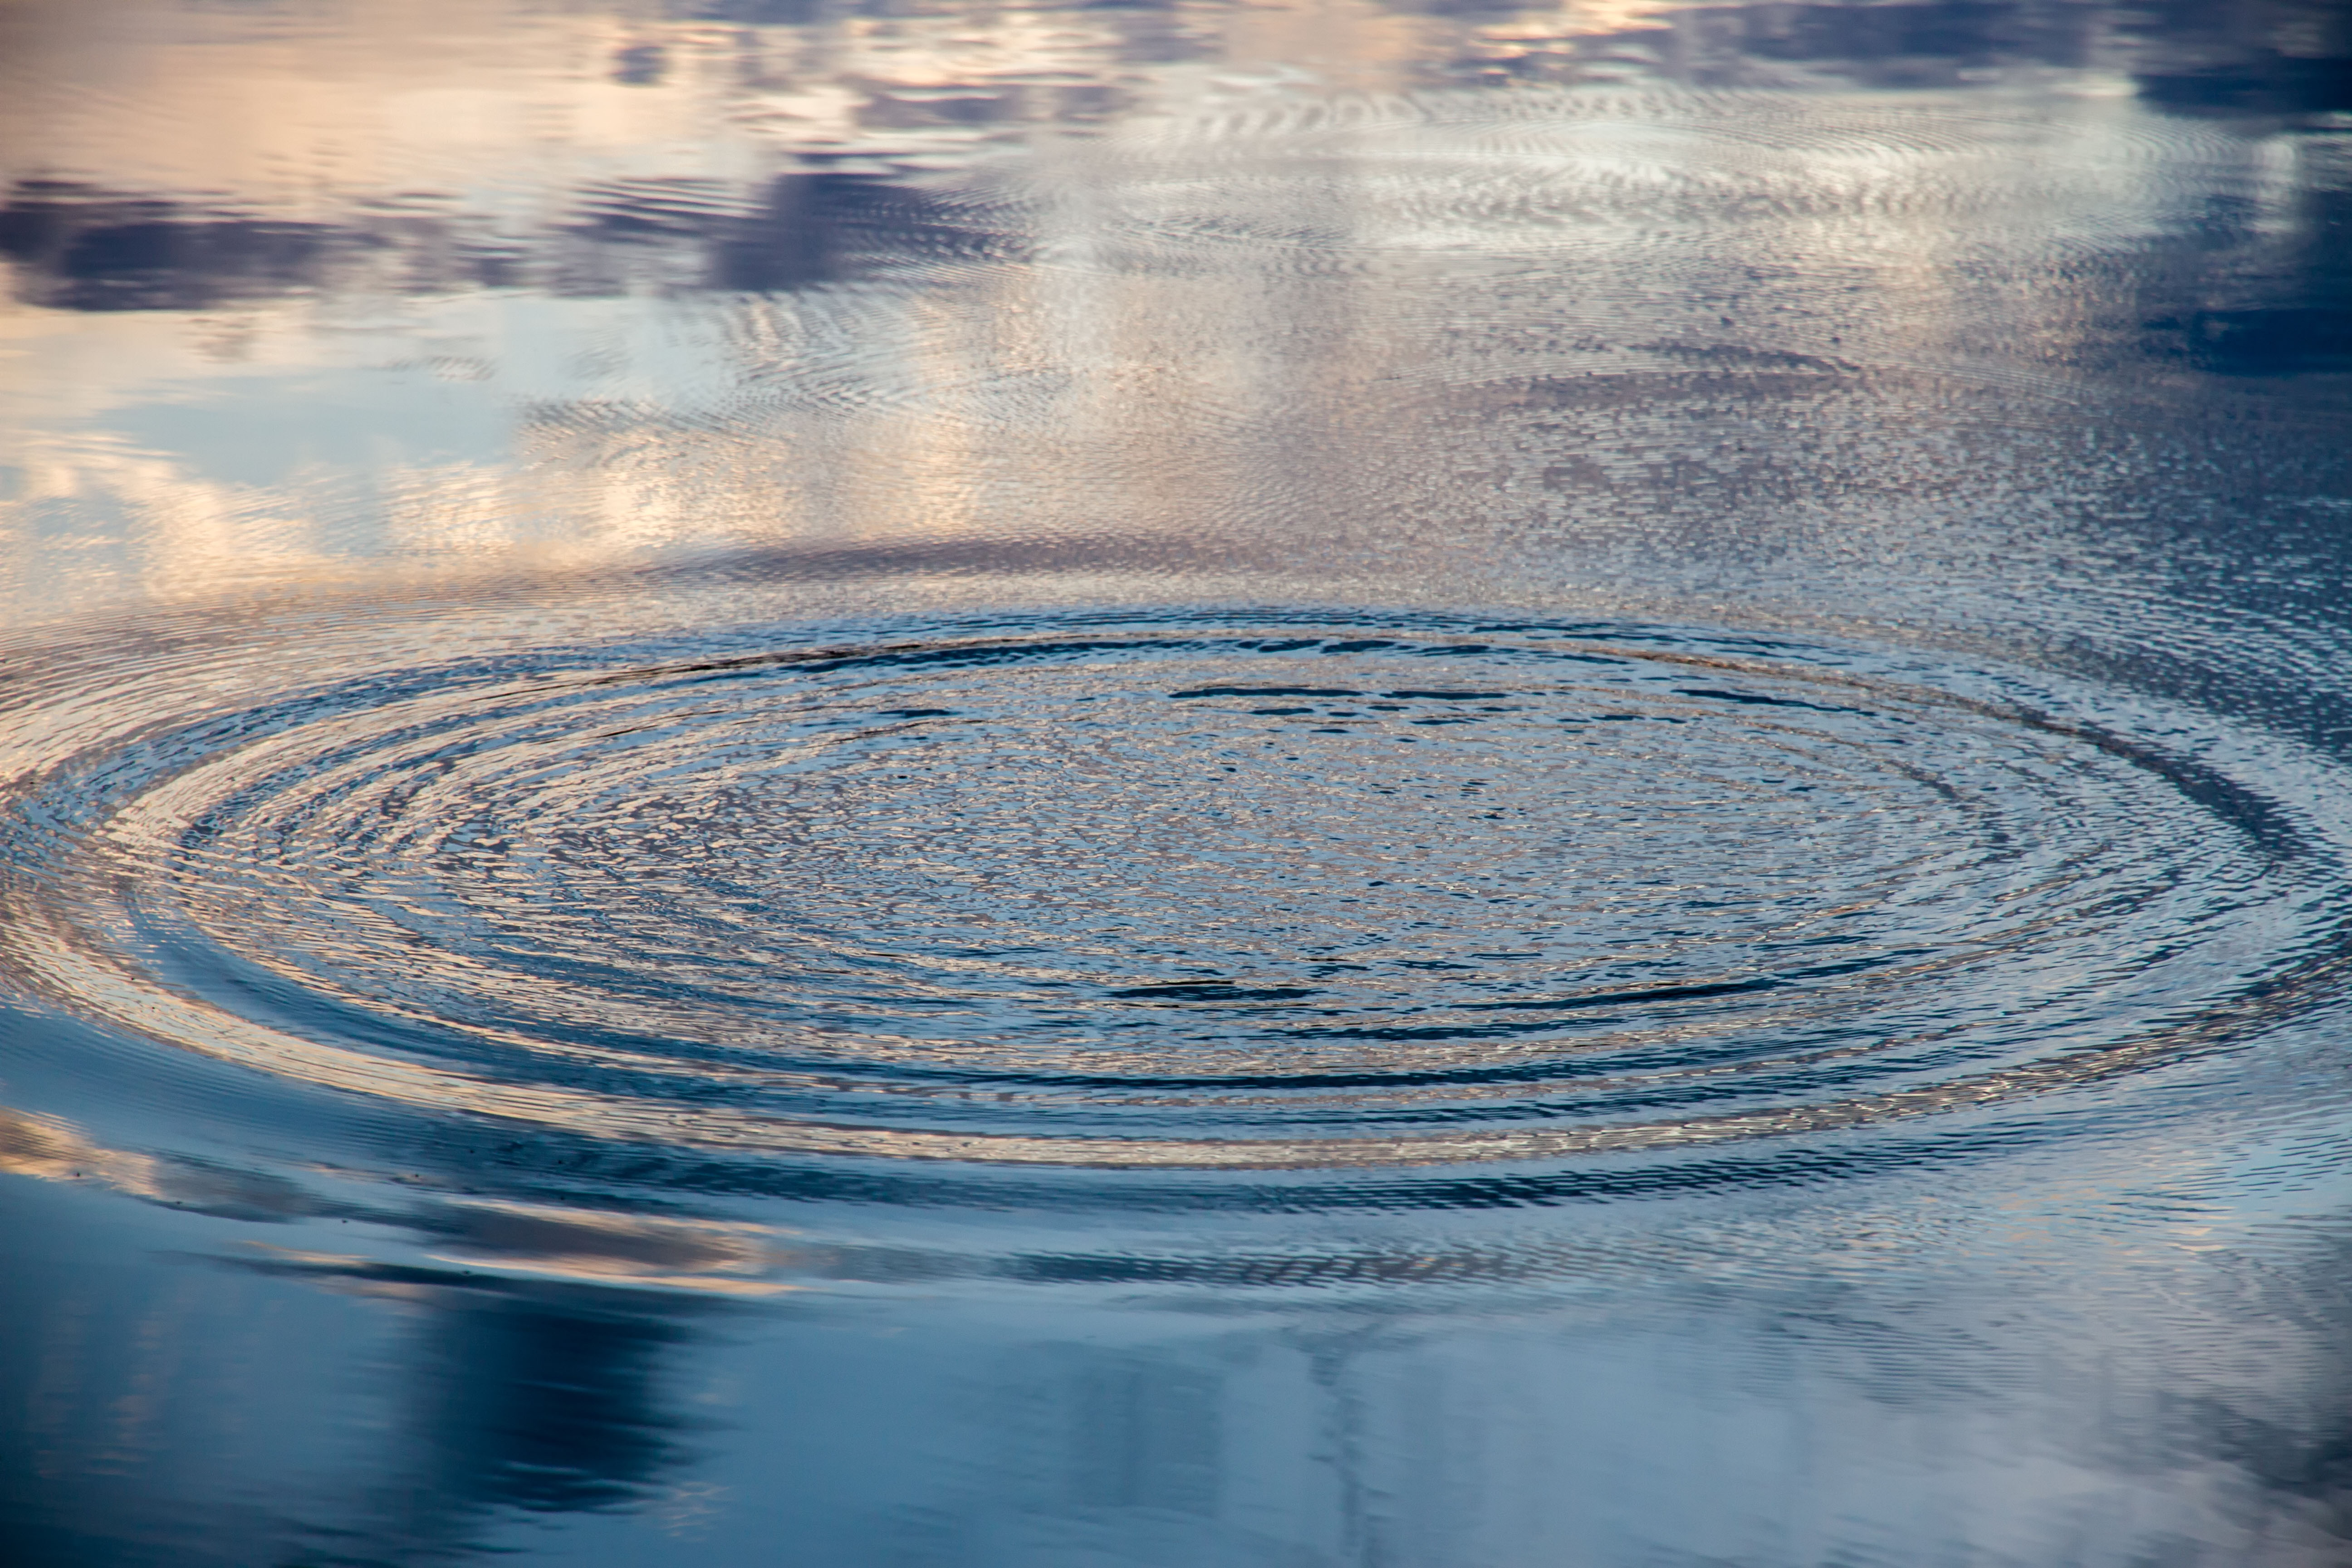 Ripples on the surface of the water. Credit: 2xWilfinger / Shutterstock